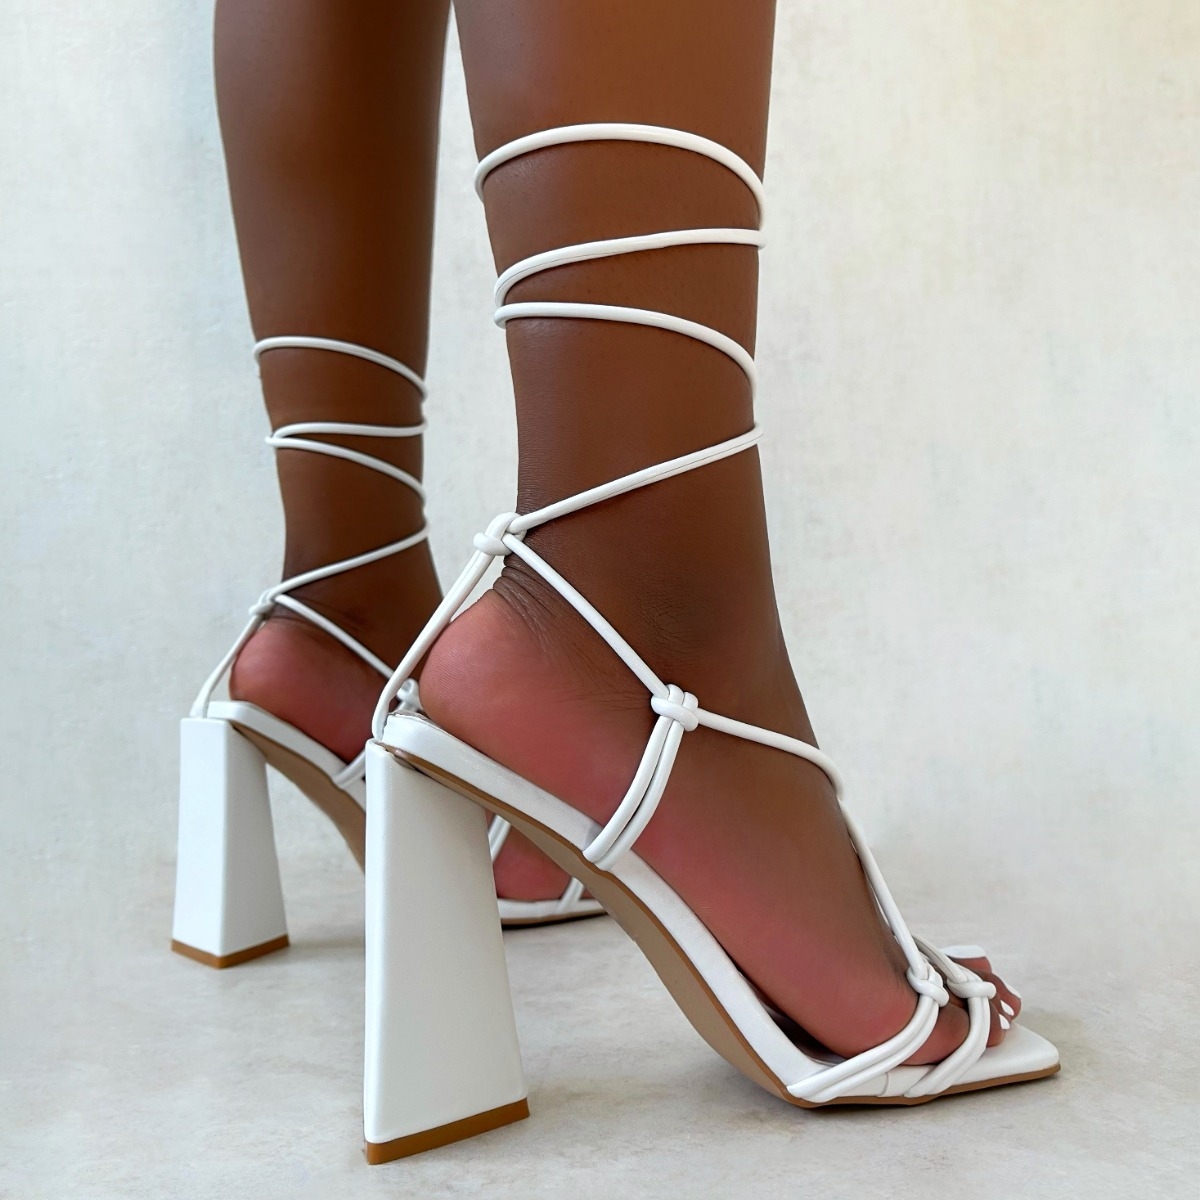 White Lace Strappy Block Heel Wedding Sandals|FSJshoes